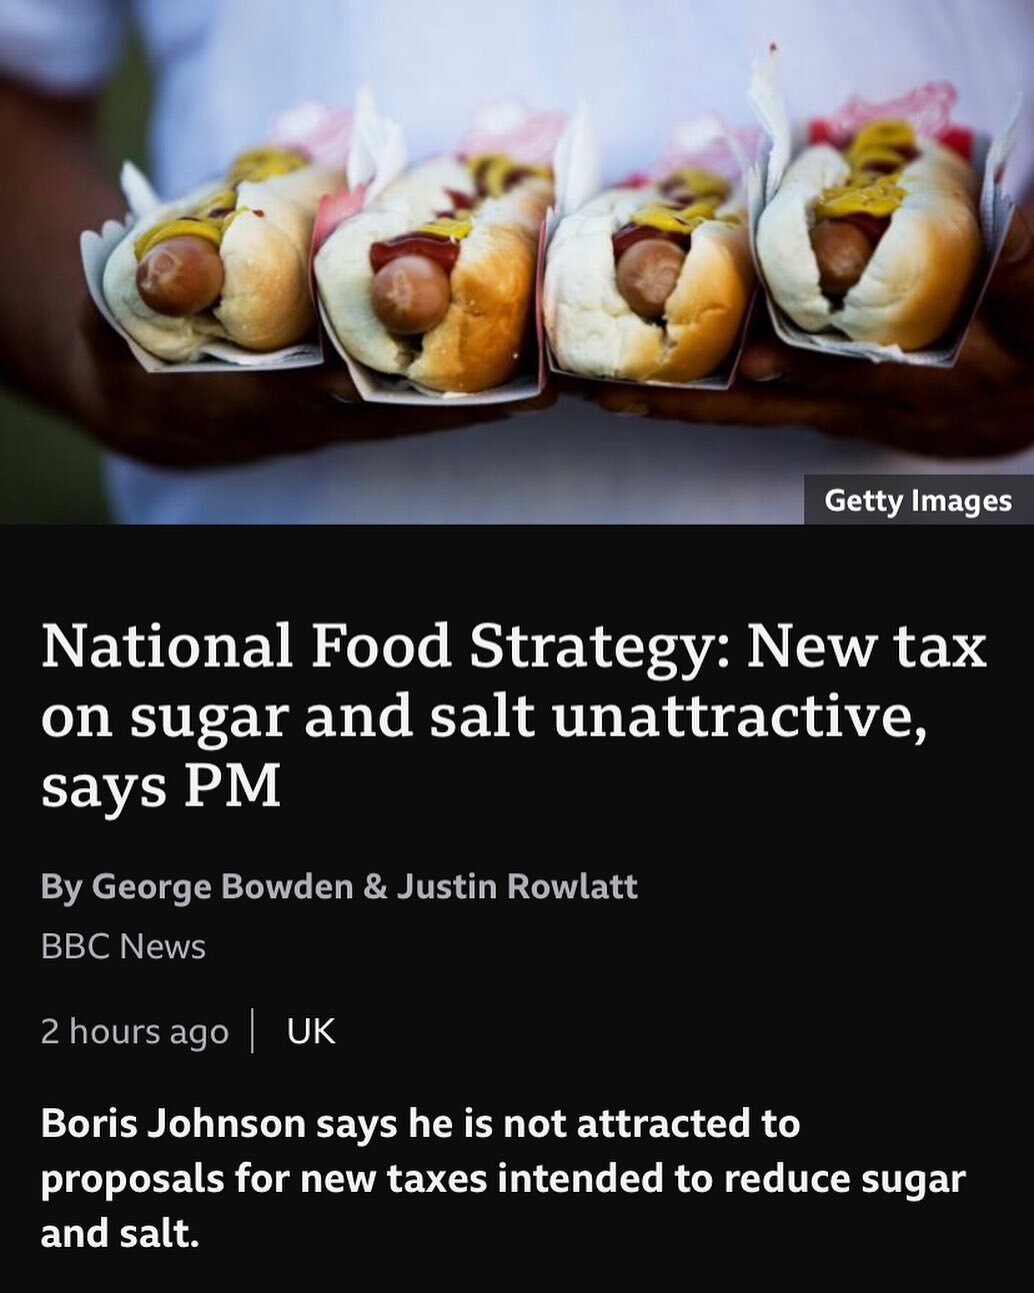 This week, the Prime Minister has announced that he finds a sugar tax an &ldquo;unattractive&rdquo; piece of legislation. He argues that it will impact those from low income households by increasing the price of food and drink. In contrast, others ar